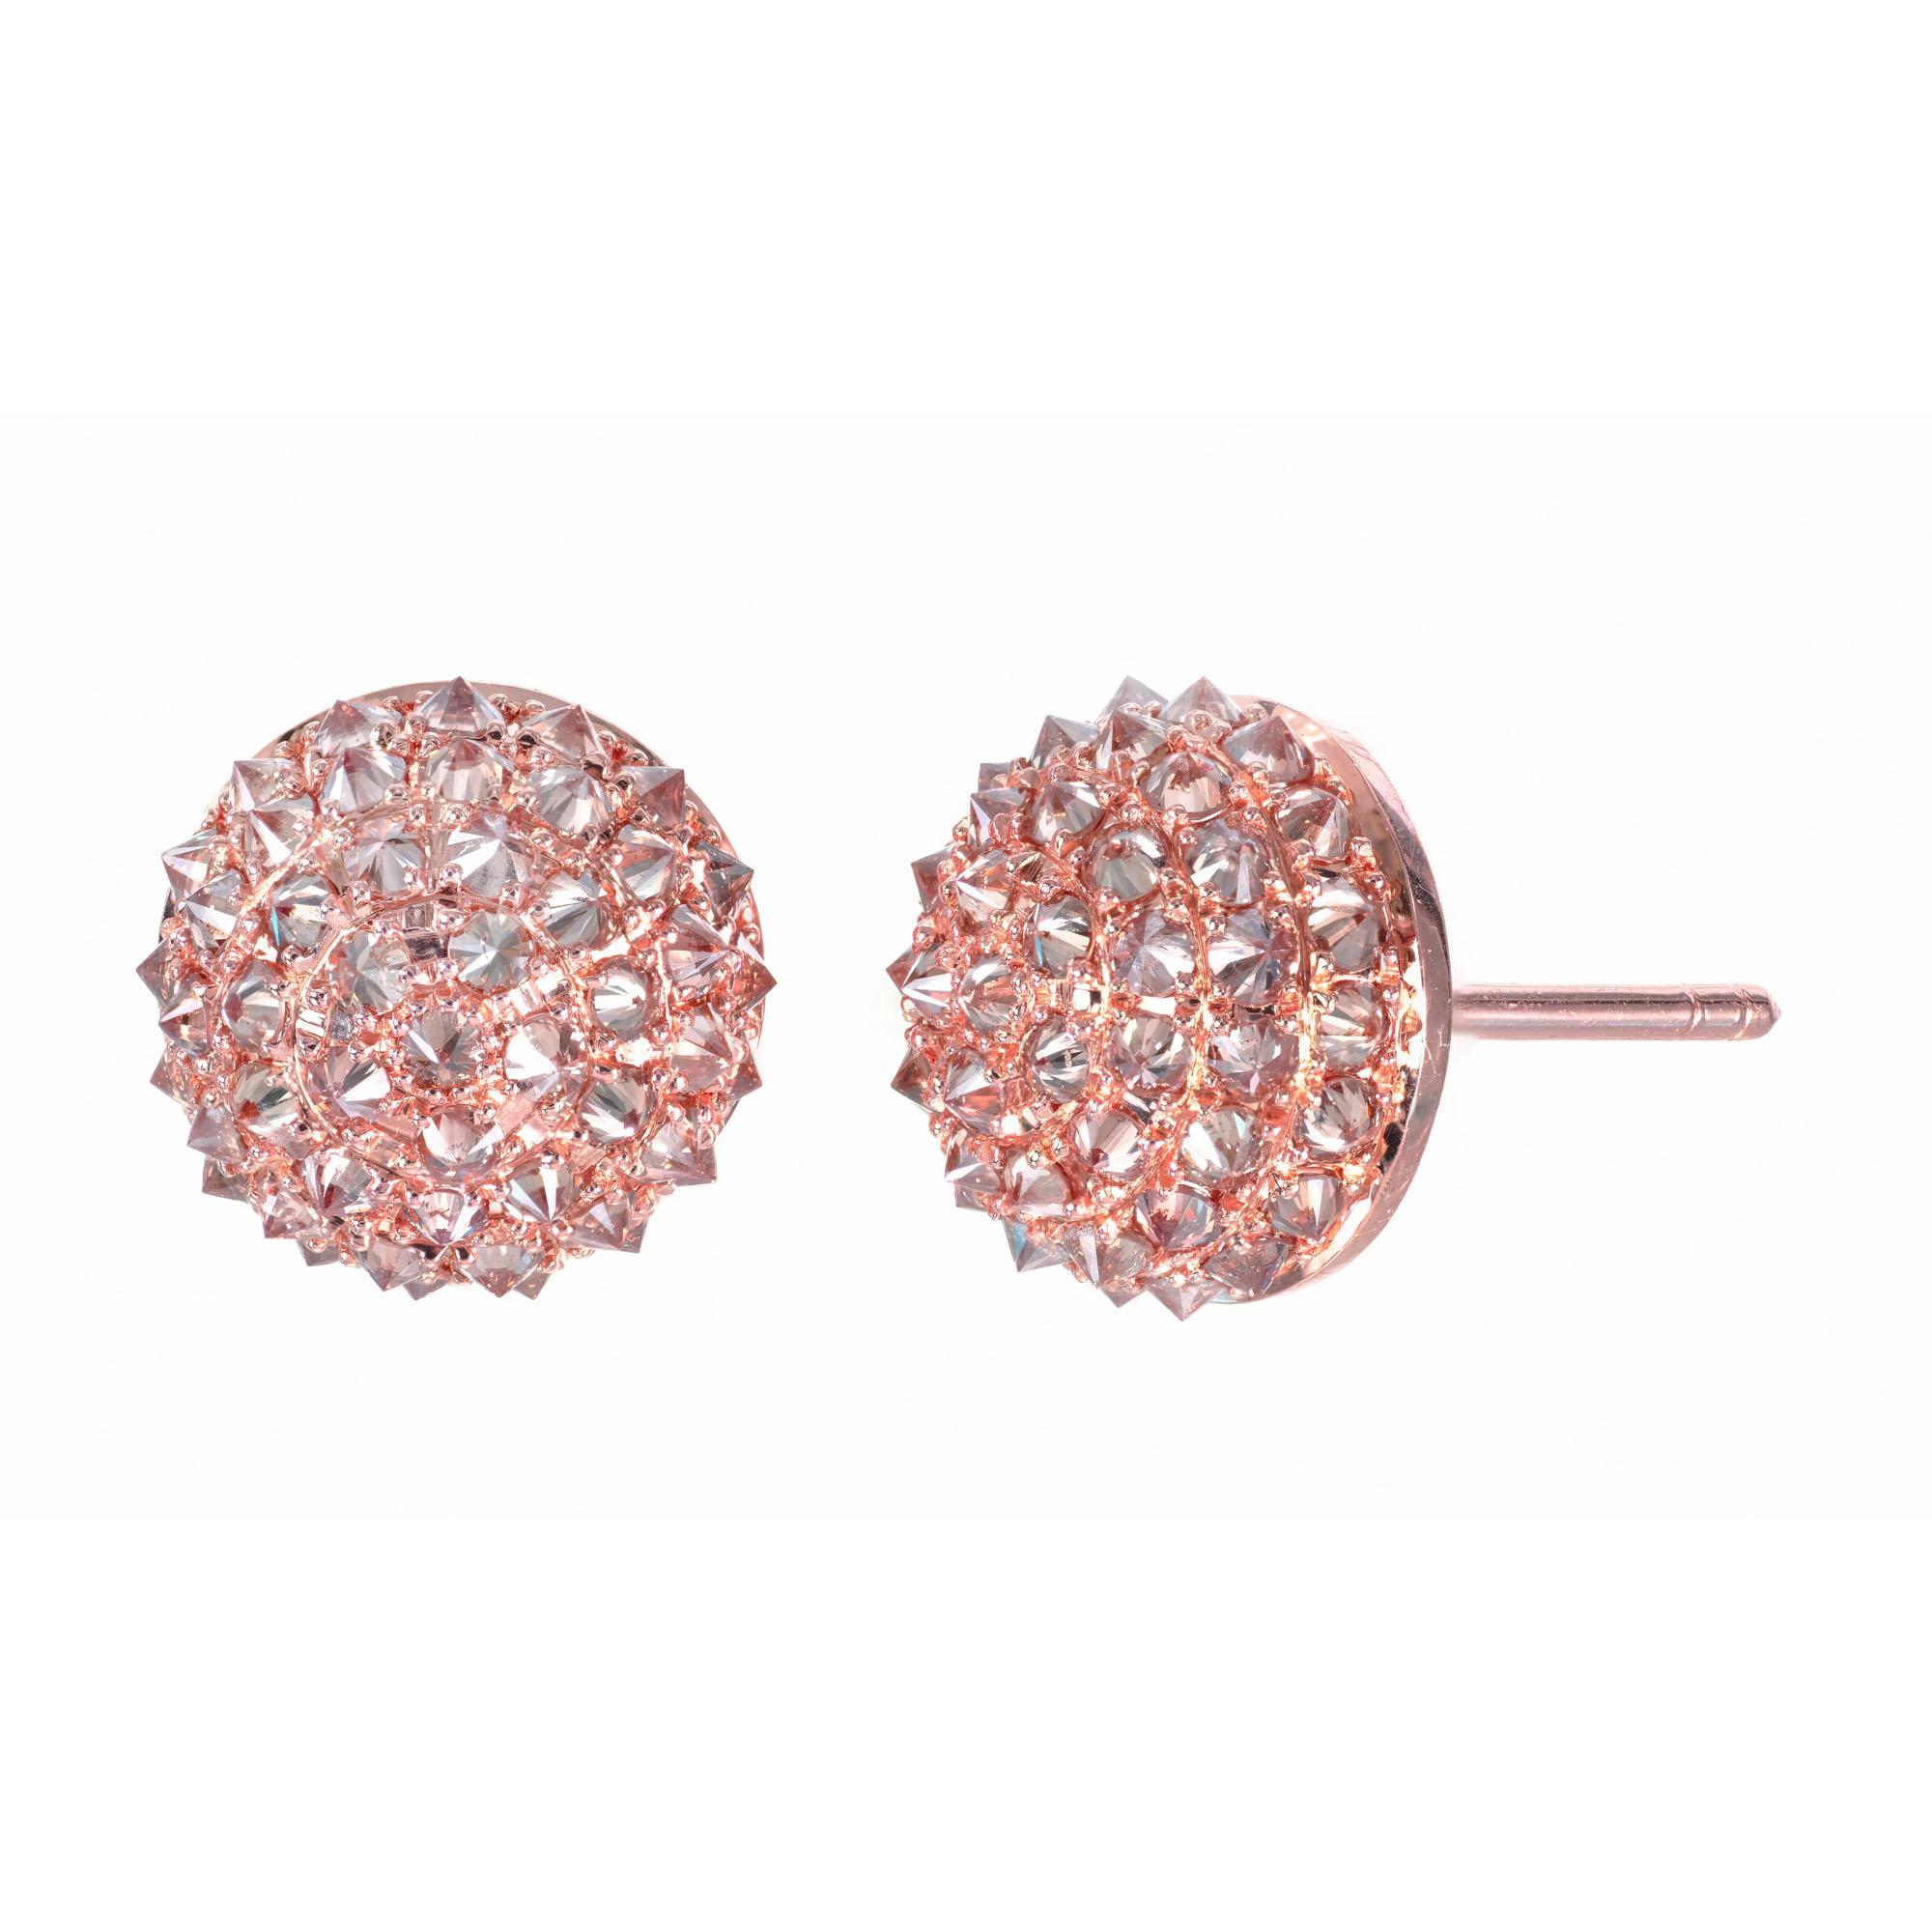 Domed round nature champagne diamond earrings with 98 bead set diamonds set bottom side up for a unique clustered look. 

98 round brilliant cut champagne diamonds, SI approx. 1.20cts
18k rose gold 
Stamped: 750
4.2 grams
Top to bottom: 10mm or 7/16